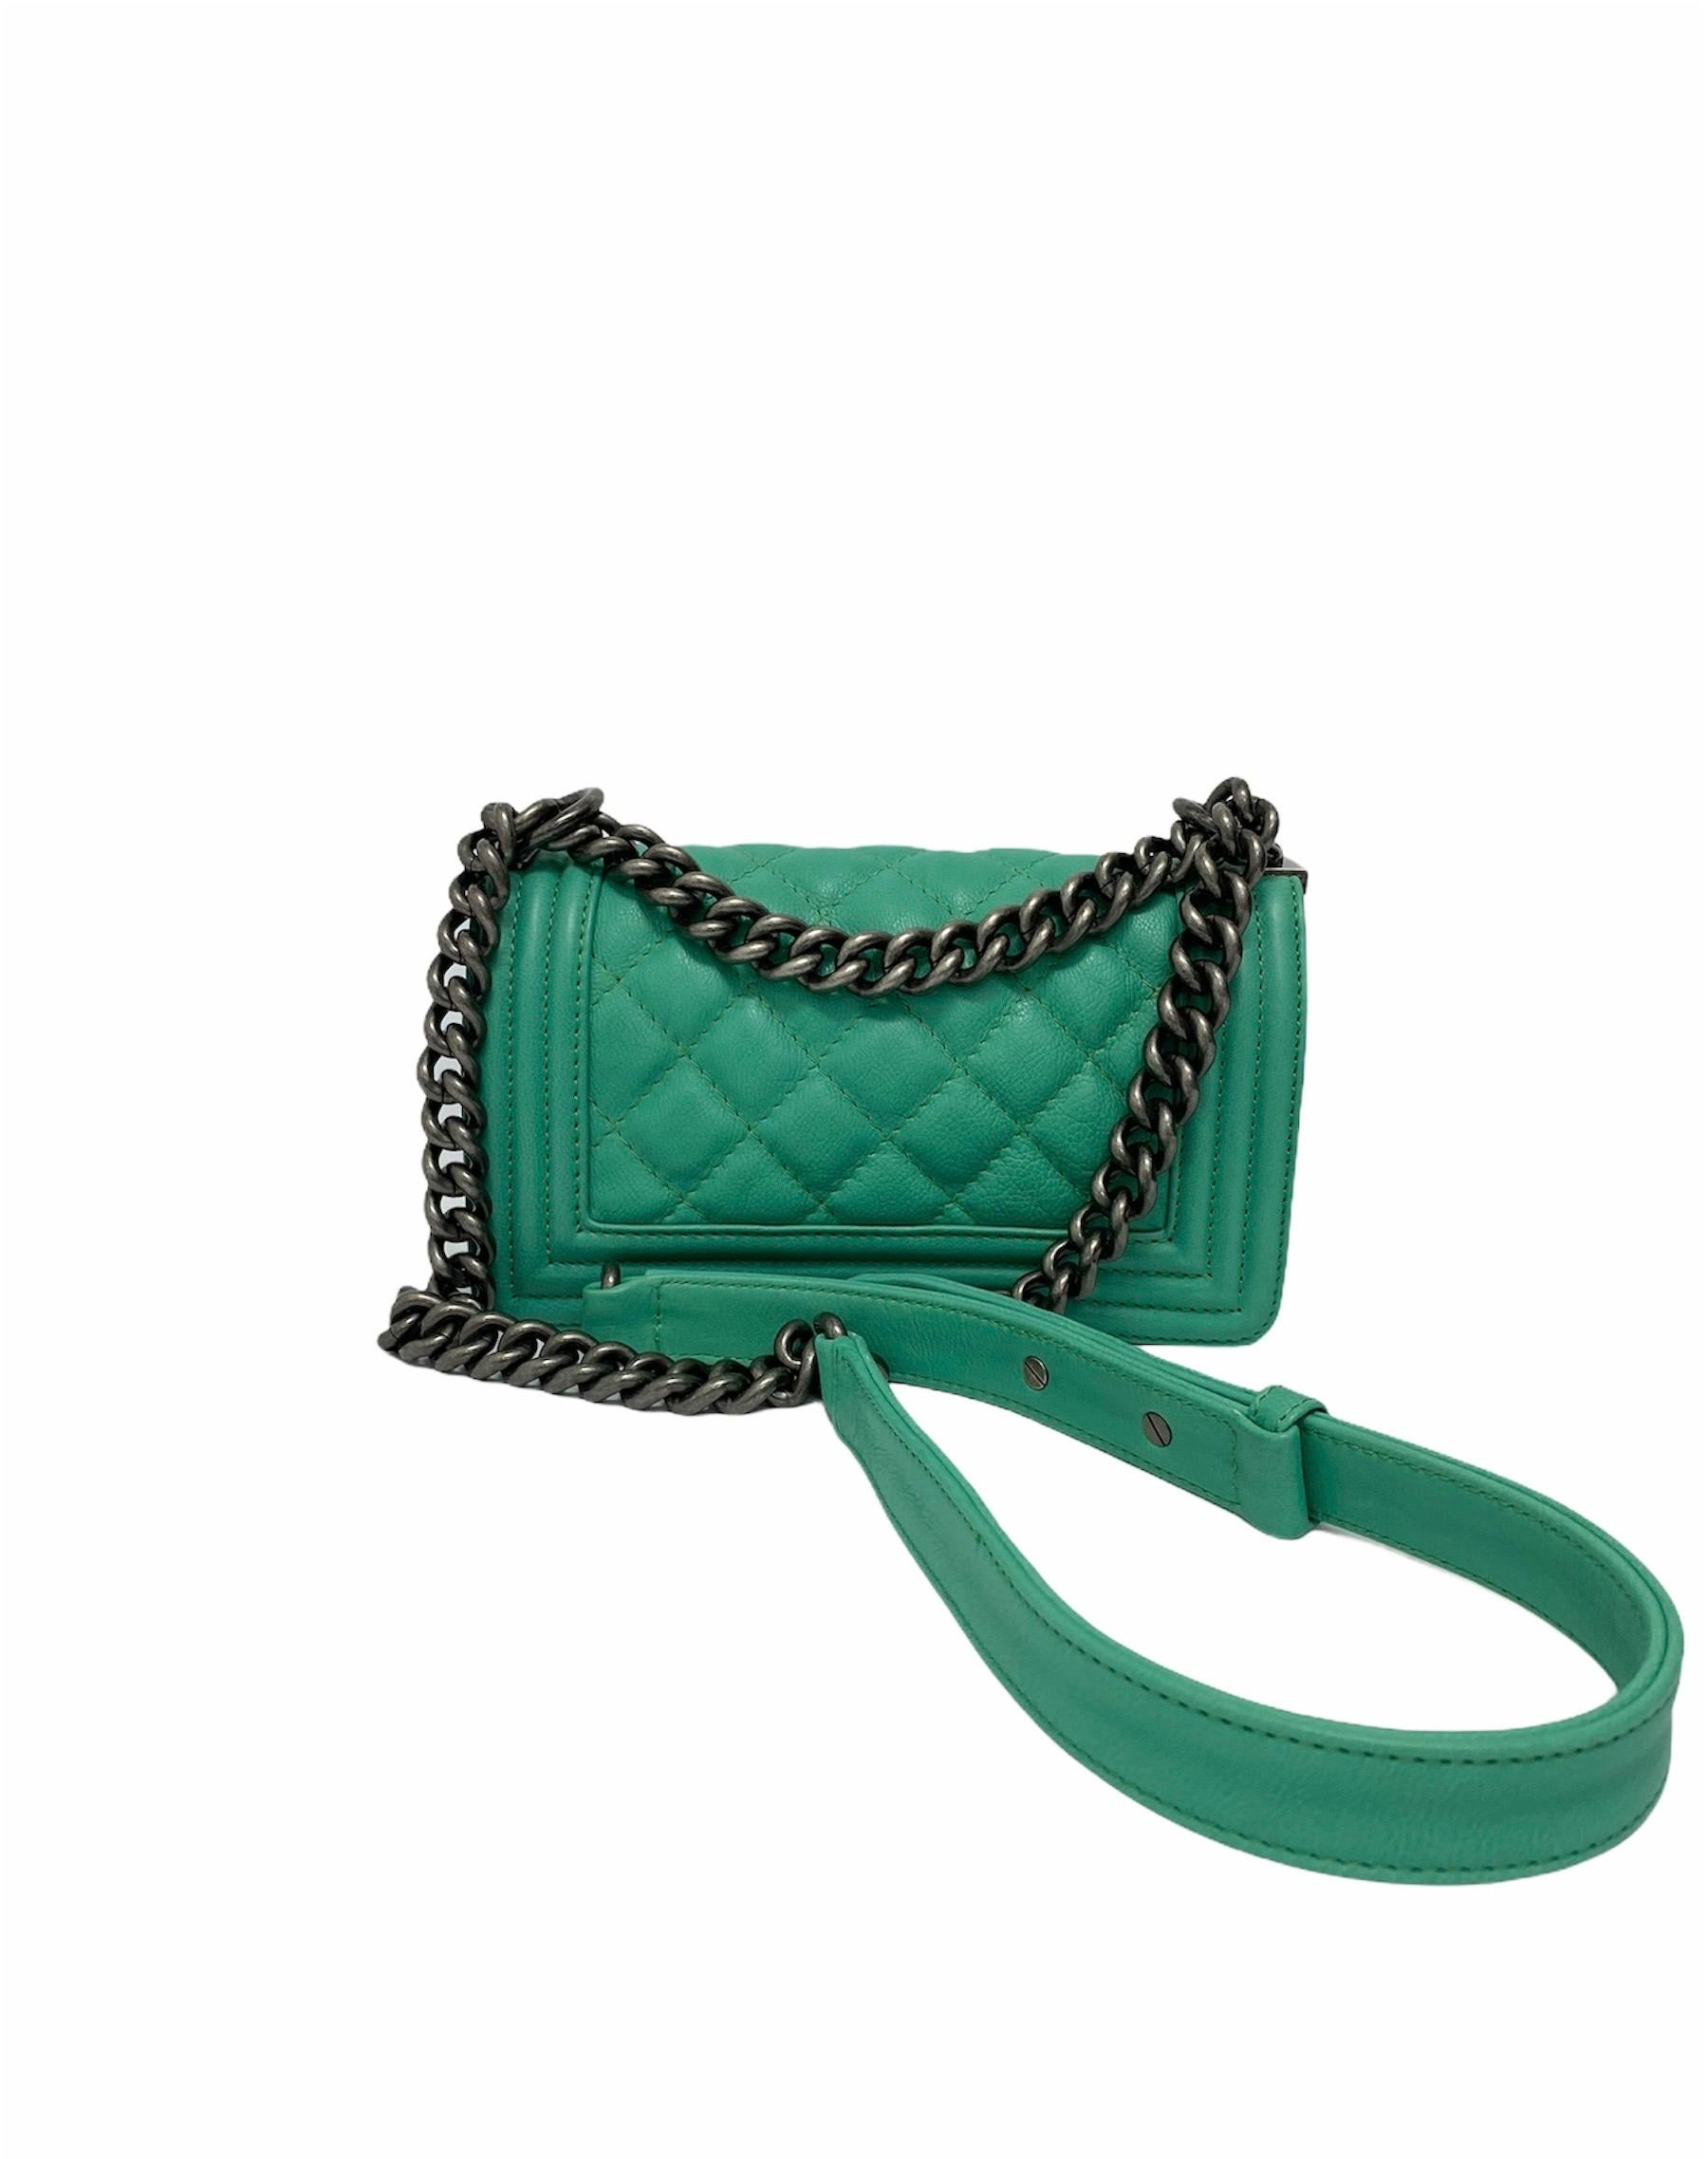 Chanel Aquamarine Green Leather Boy Bag In Excellent Condition For Sale In Torre Del Greco, IT